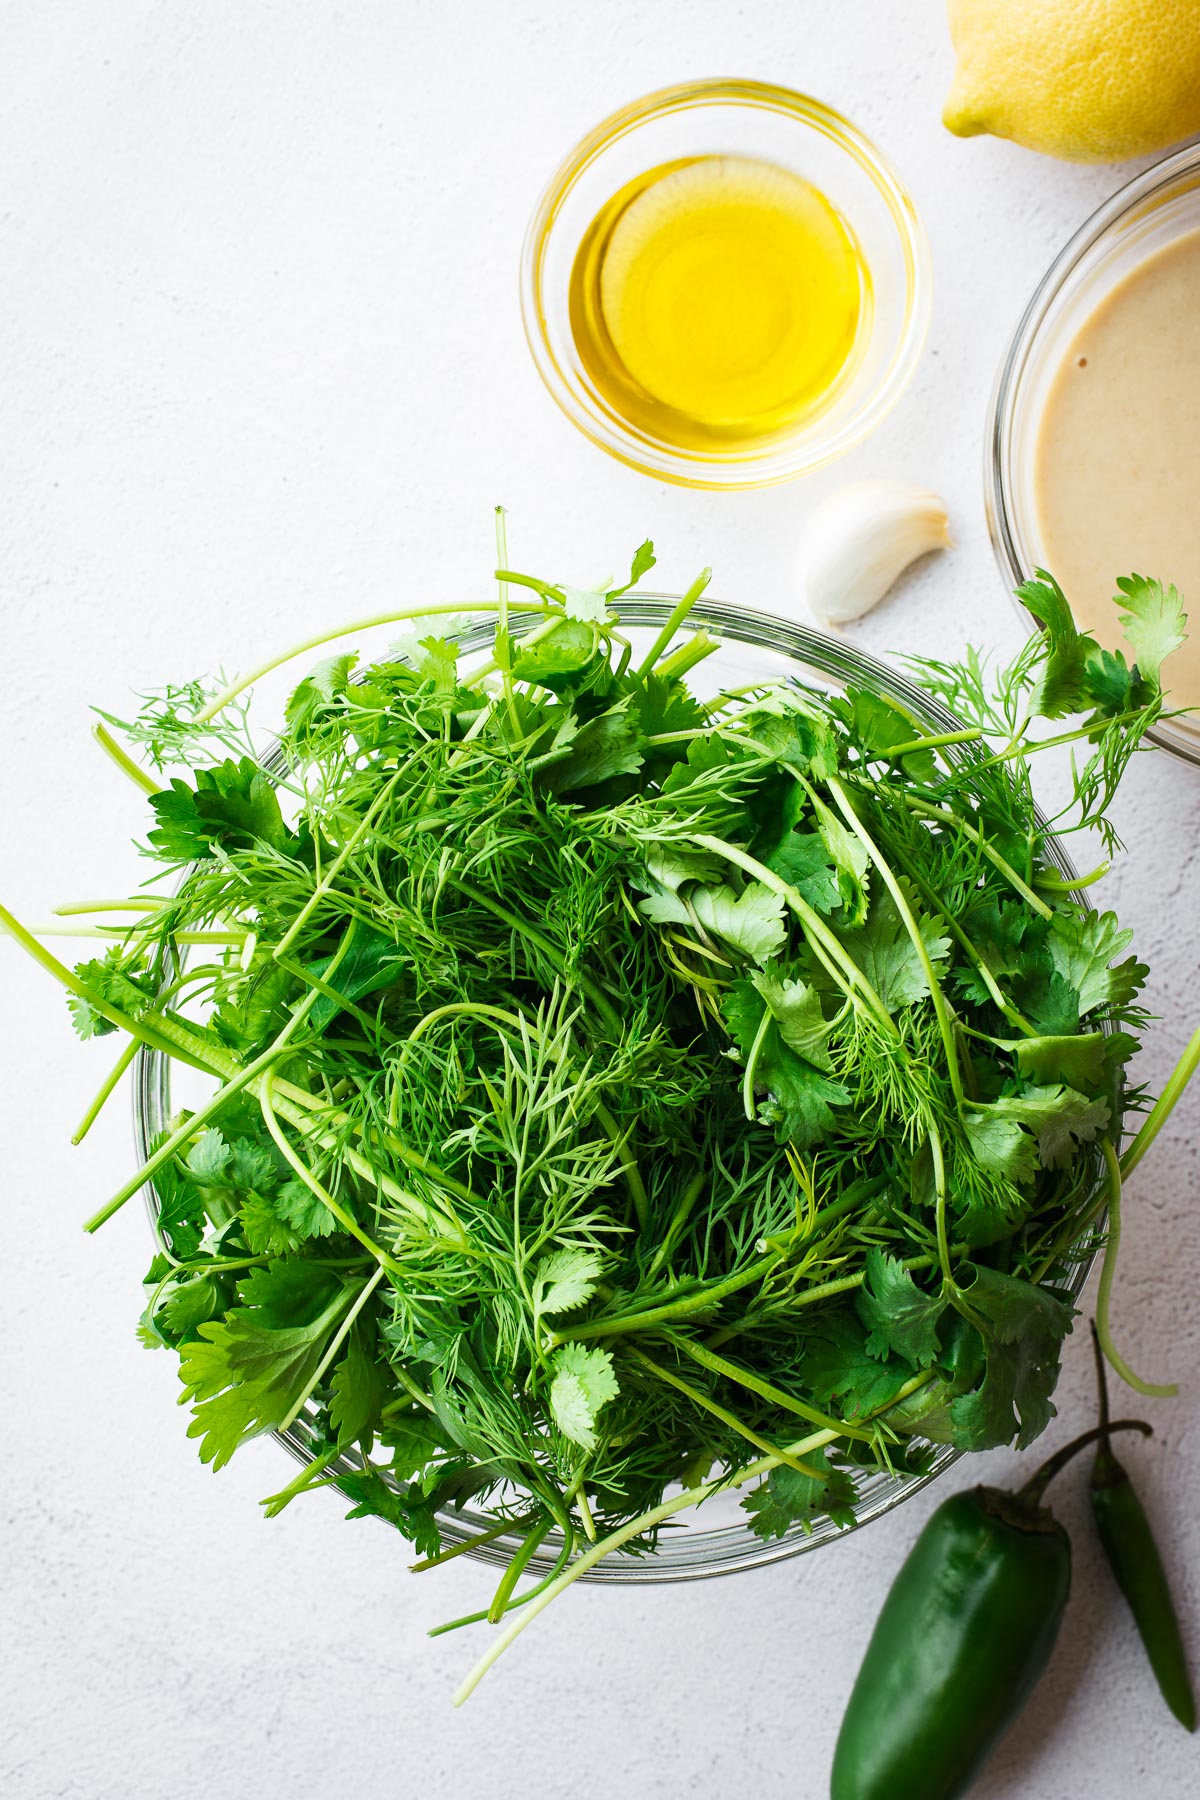 A selection of fresh herbs, including dill, flat-leaf parsley, coriander and mint, in a glass bowl surrounded by ingredients.